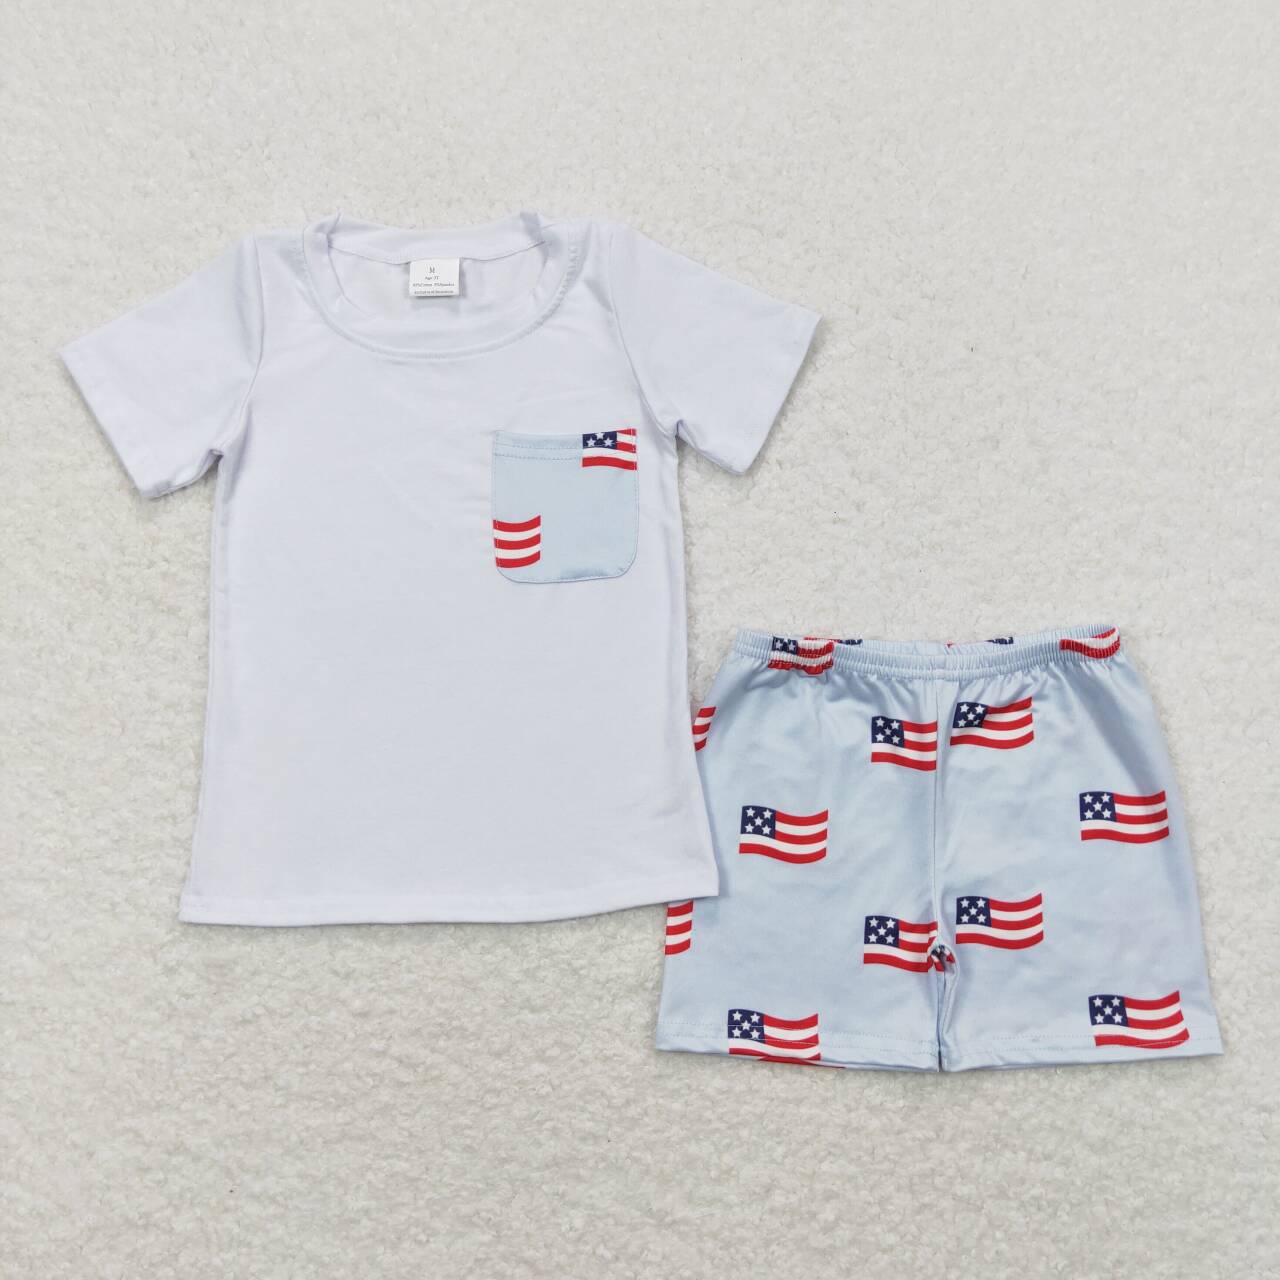 BSSO0642 White Pocket Top Flags Shorts Boys 4th of July Clothes Set